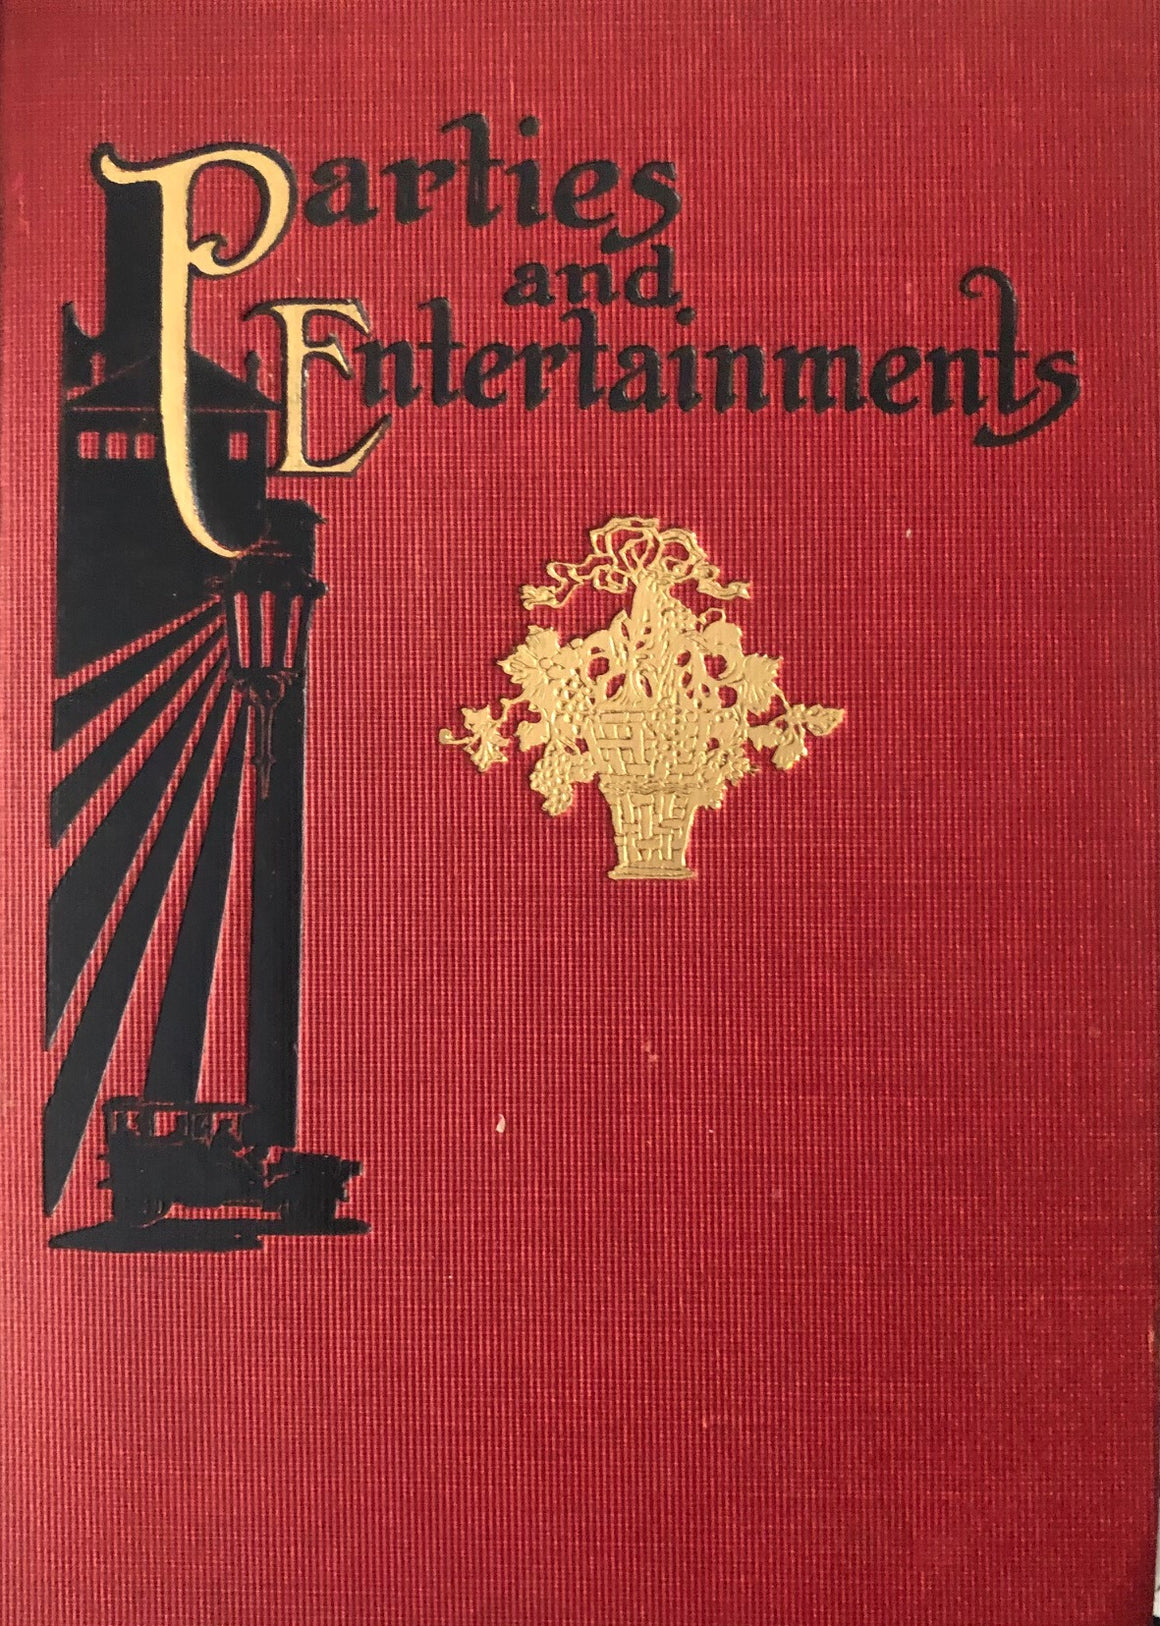 (*NEW ARRIVAL*) (Etiquette) Pierce, Paul. Parties and Entertainments: Novel Suggestions for Social Occasions.